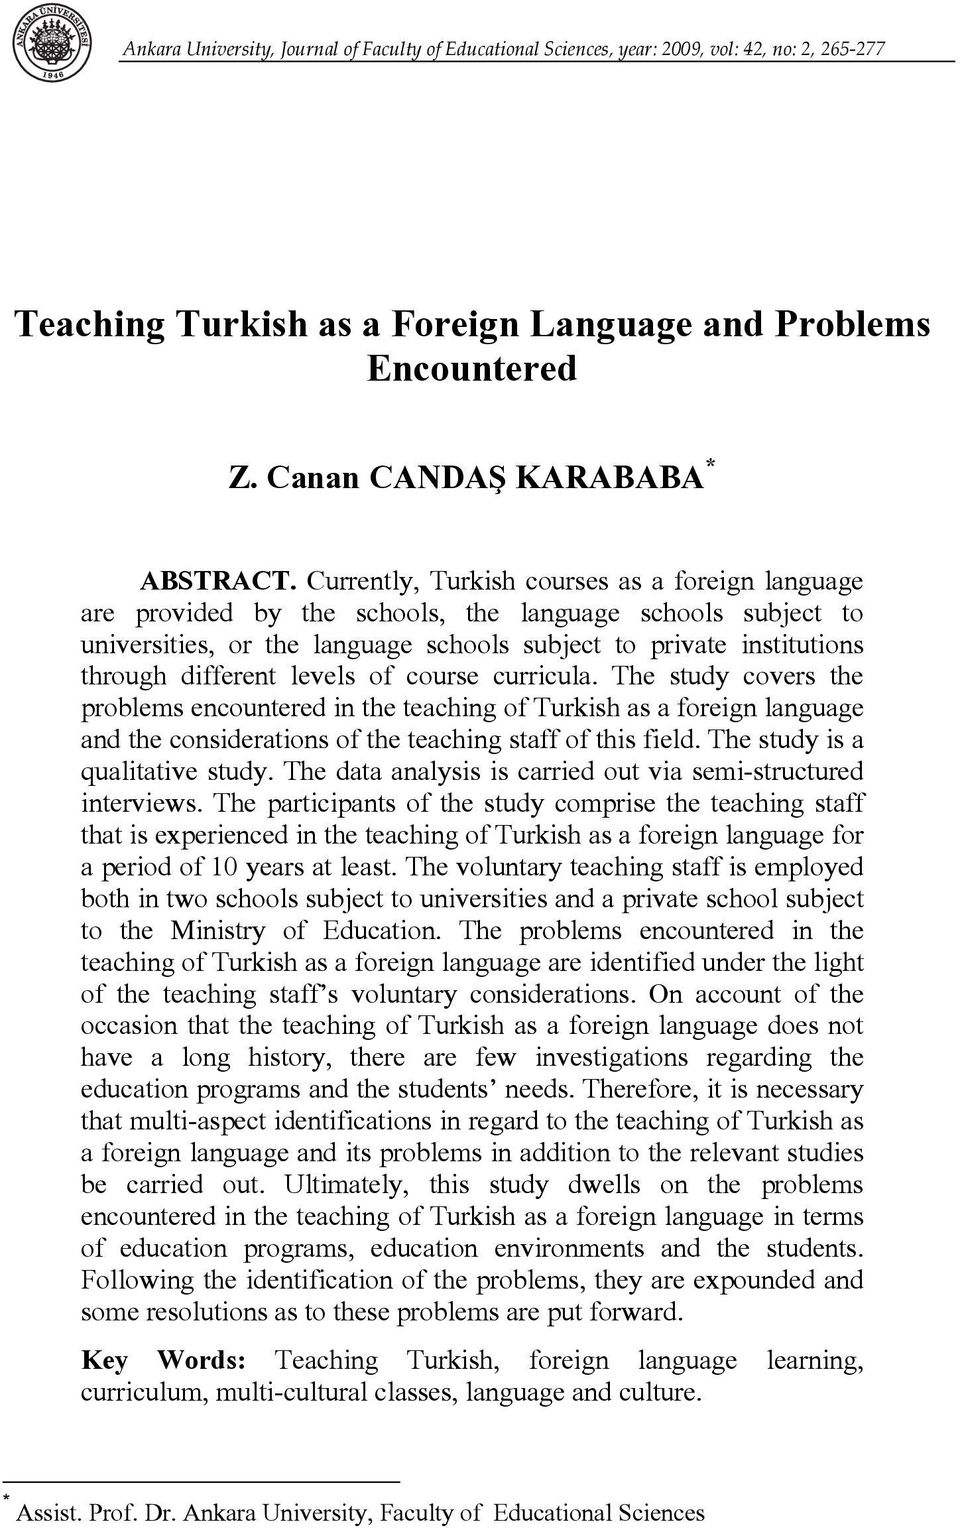 levels of course curricula. The study covers the problems encountered in the teaching of Turkish as a foreign language and the considerations of the teaching staff of this field.